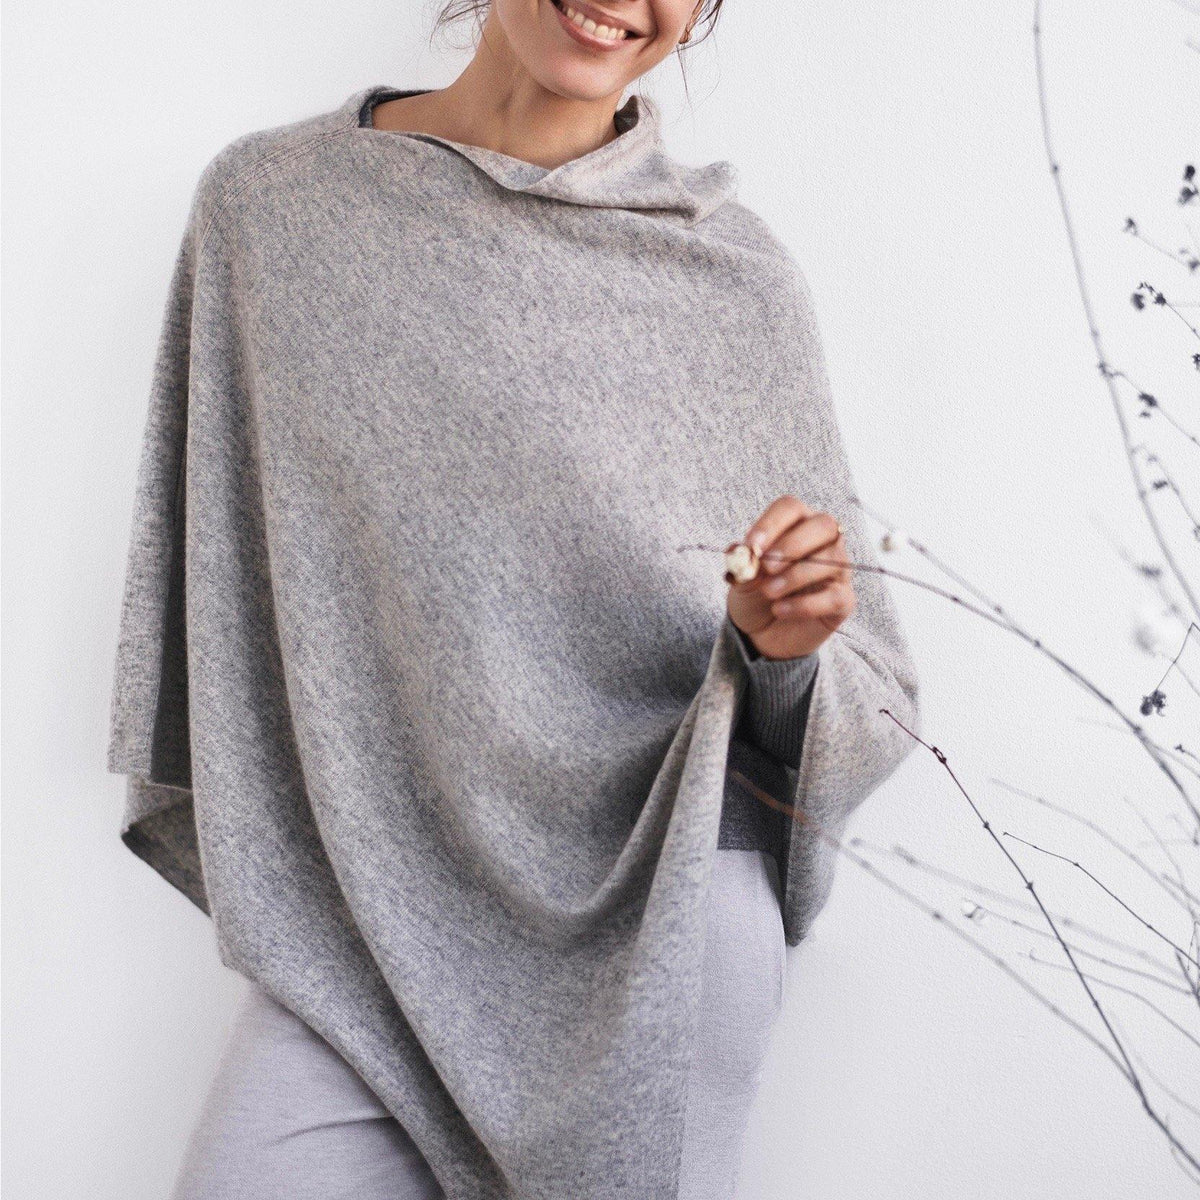 CARE BY ME 100% Cashmere Womens Lena Poncho